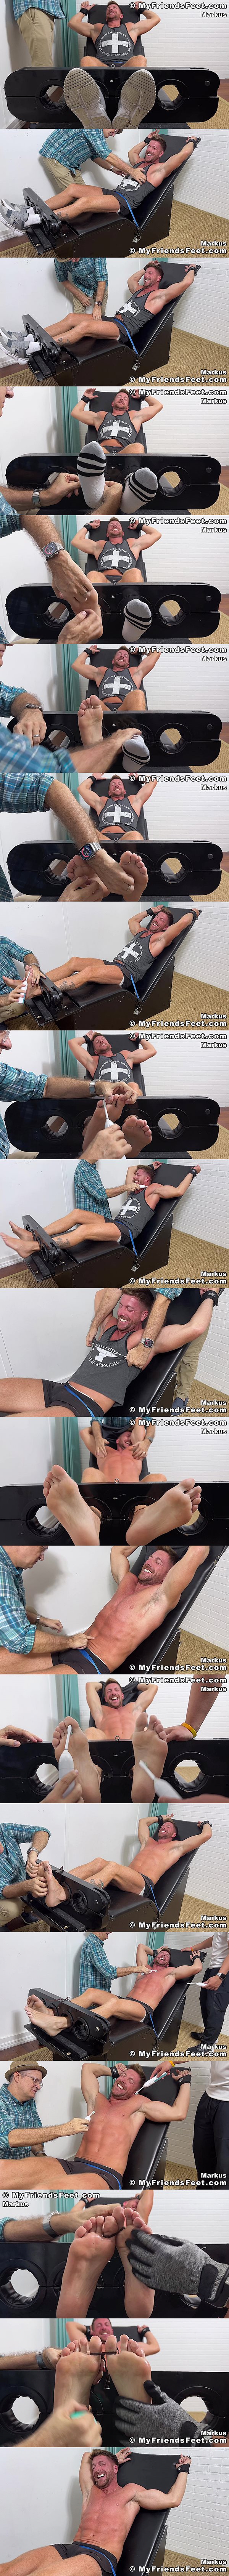 Straight muscle hunk, Argentinian hottie Markus gets tied to the tickle chair and tickled by Dan Edwards at My Friends Feet 01